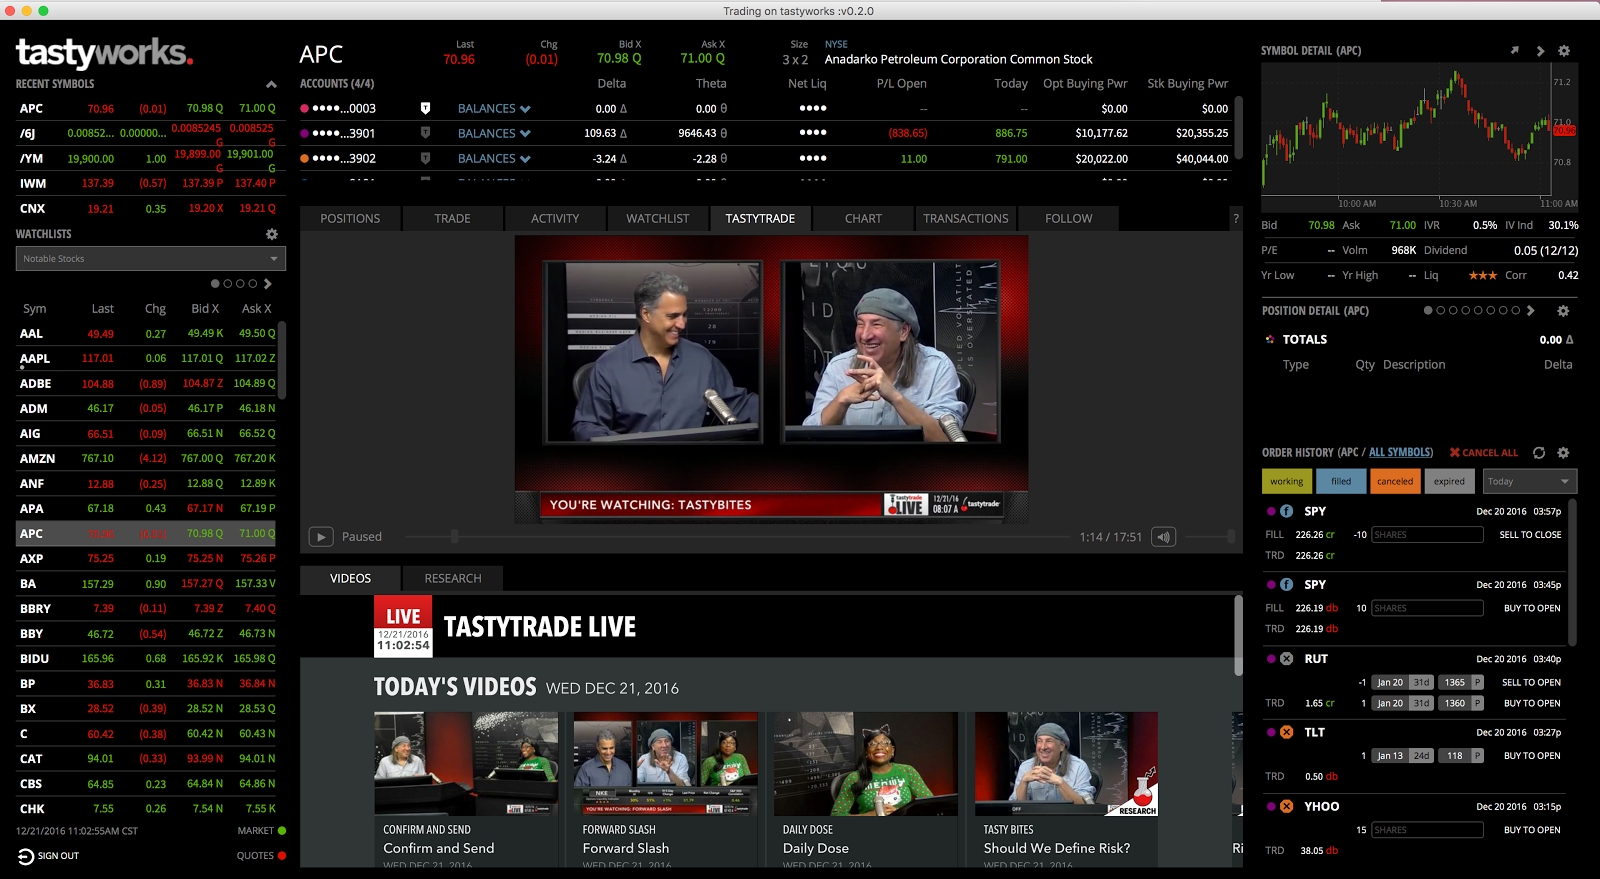 Tastytrade Team Launches Tastyworks - a New Brokerage Firm ...